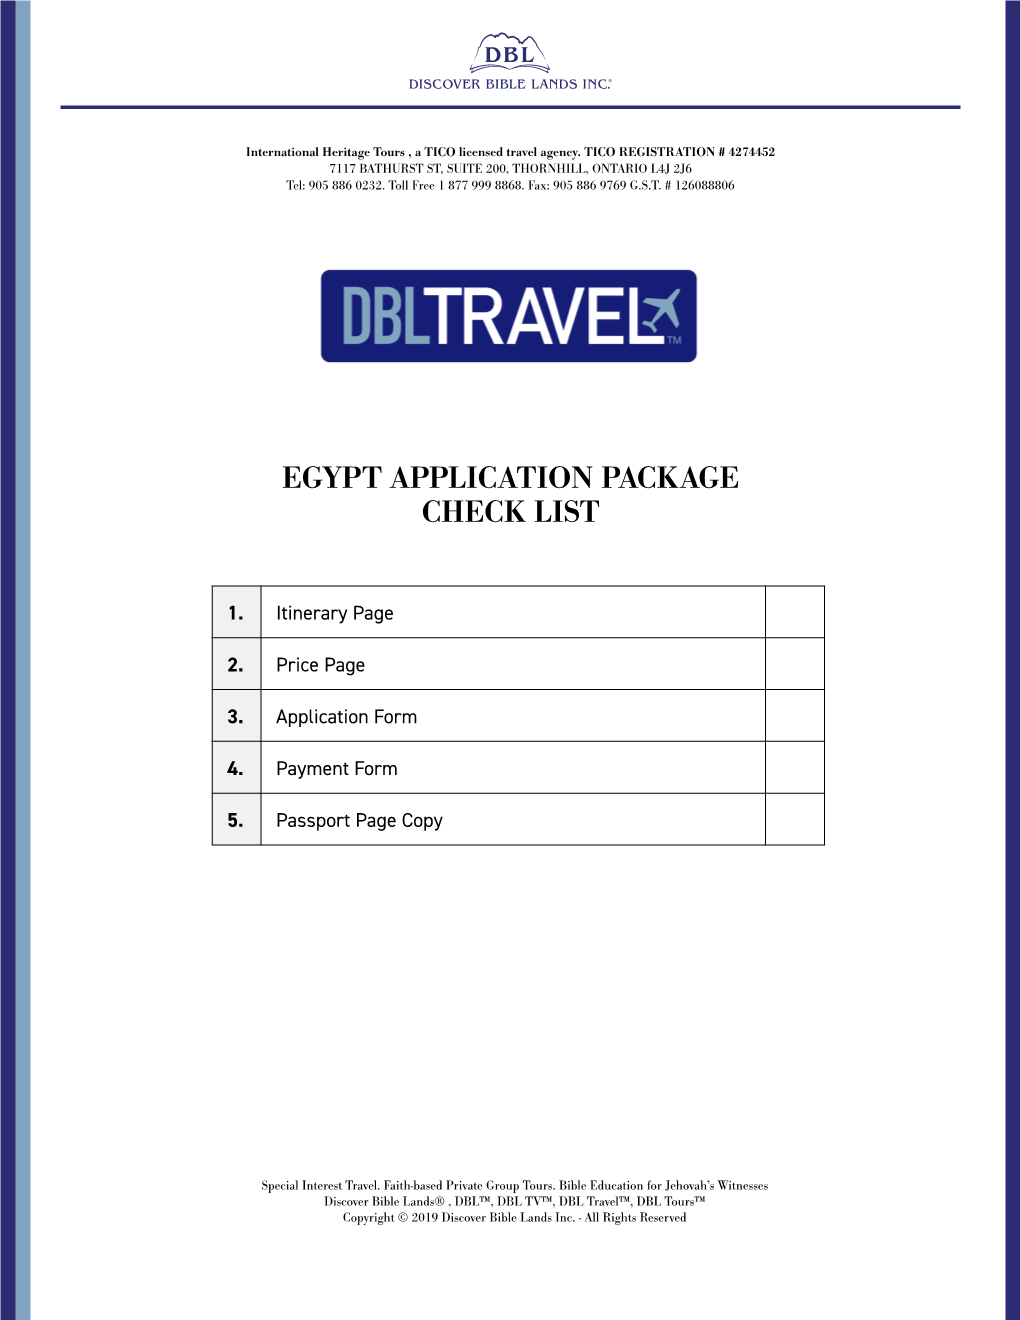 Egypt Application Package Check List